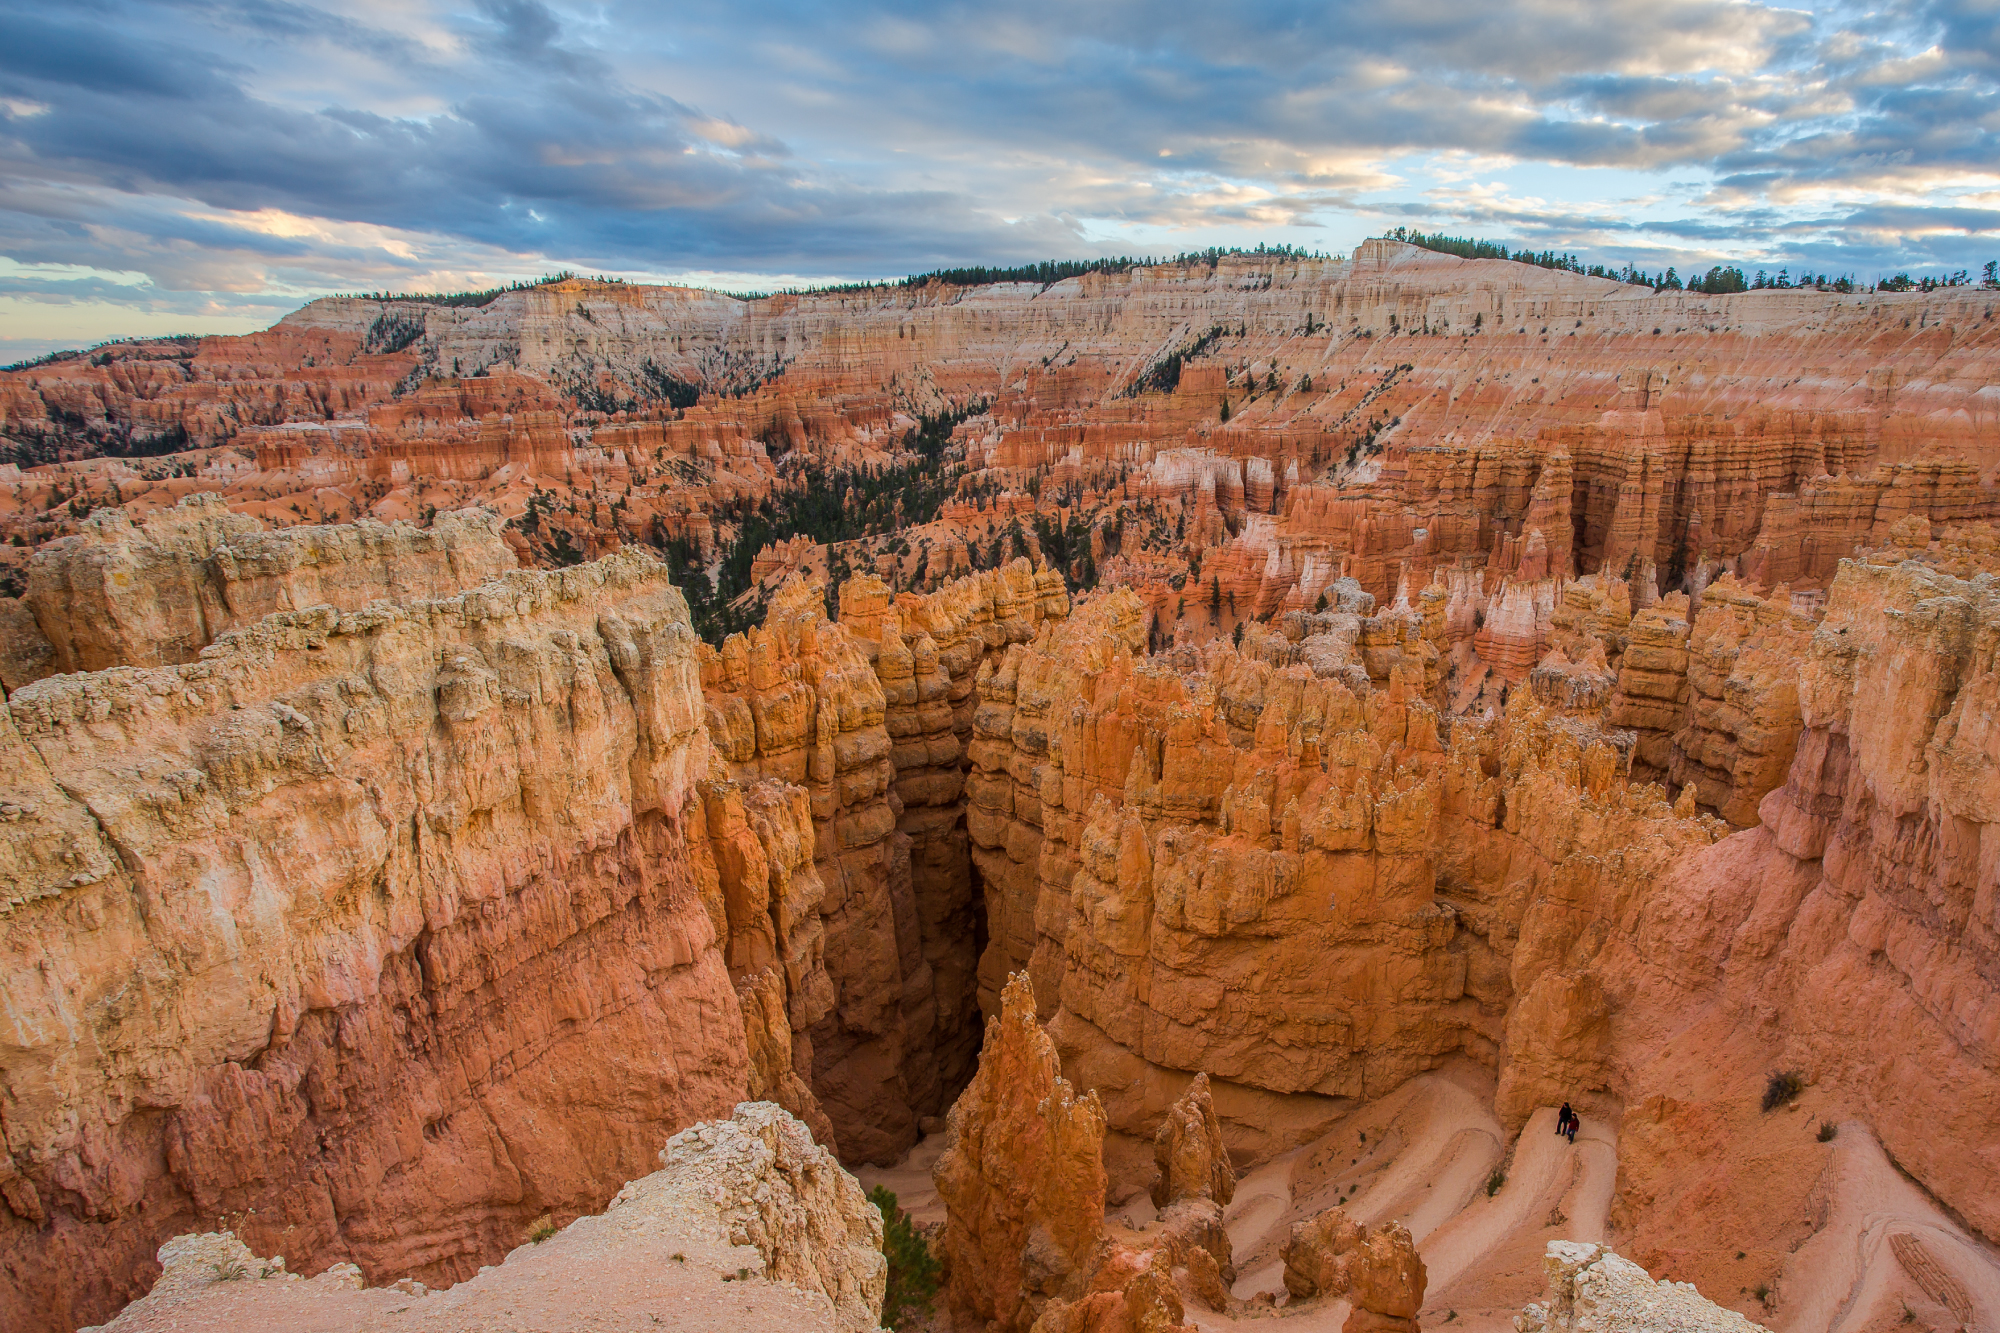 HDR Photography Workshop: Bryce Canyon HDR | Pt.6 | Final Image Processing